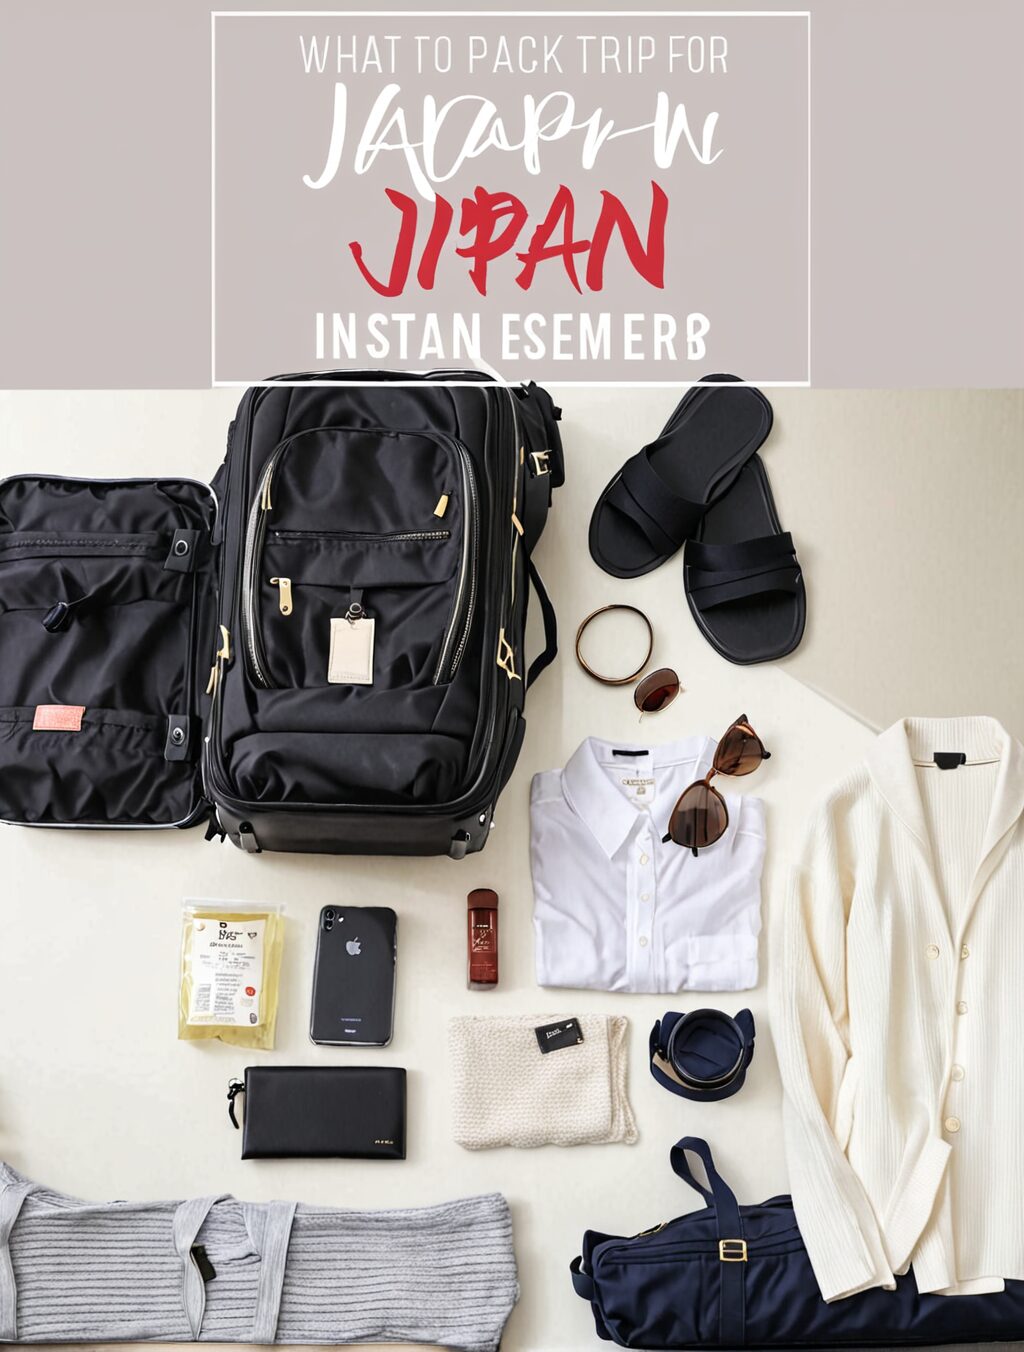 what to pack for a trip to japan in september